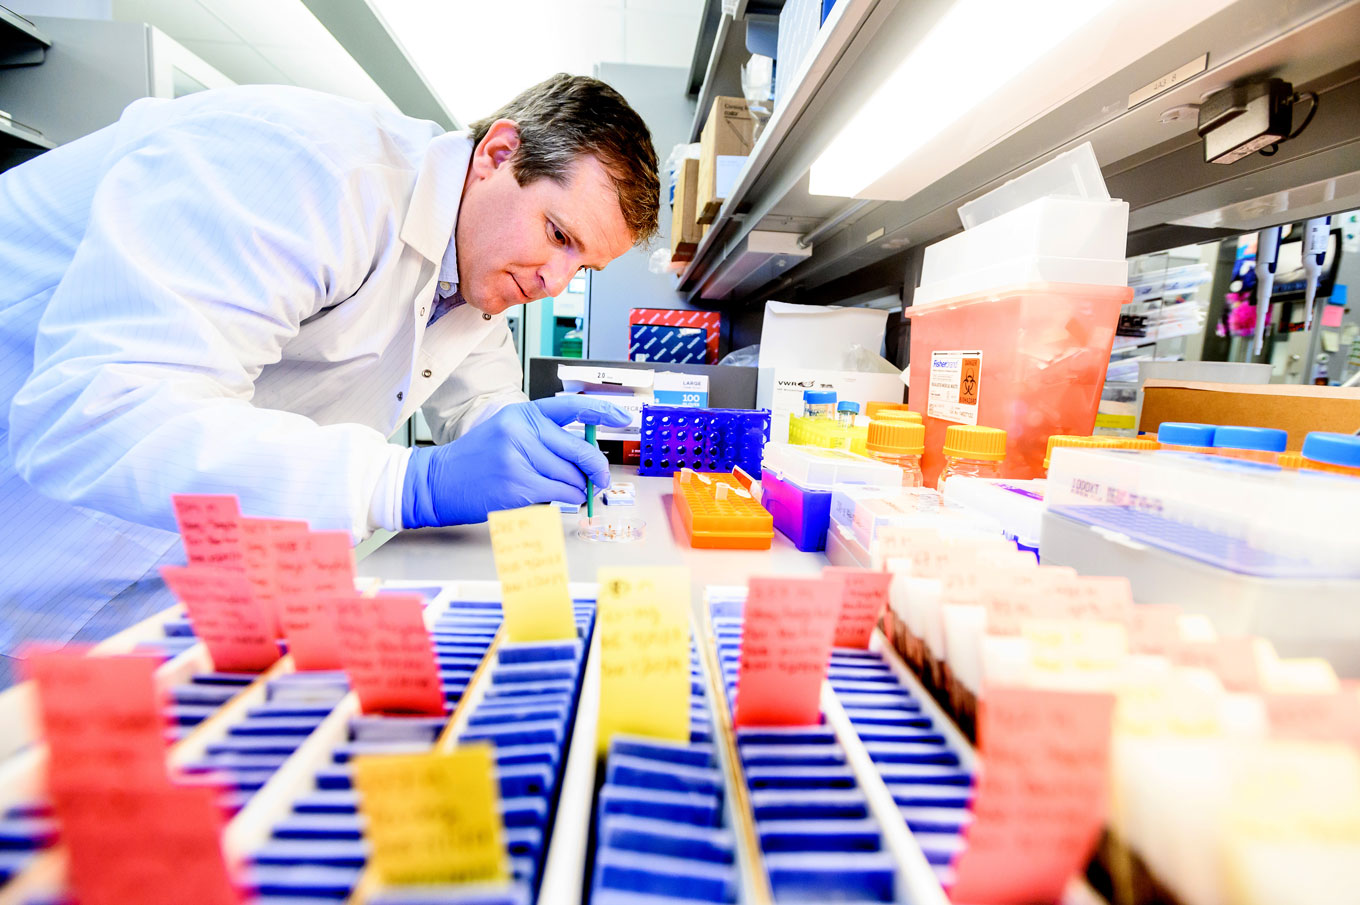 David Solomon (left) extracts DNA from brain tumor tissue for genomic testing in a lab. In the forefront, there are blue testing trays with yellow and red notes sticking out. 